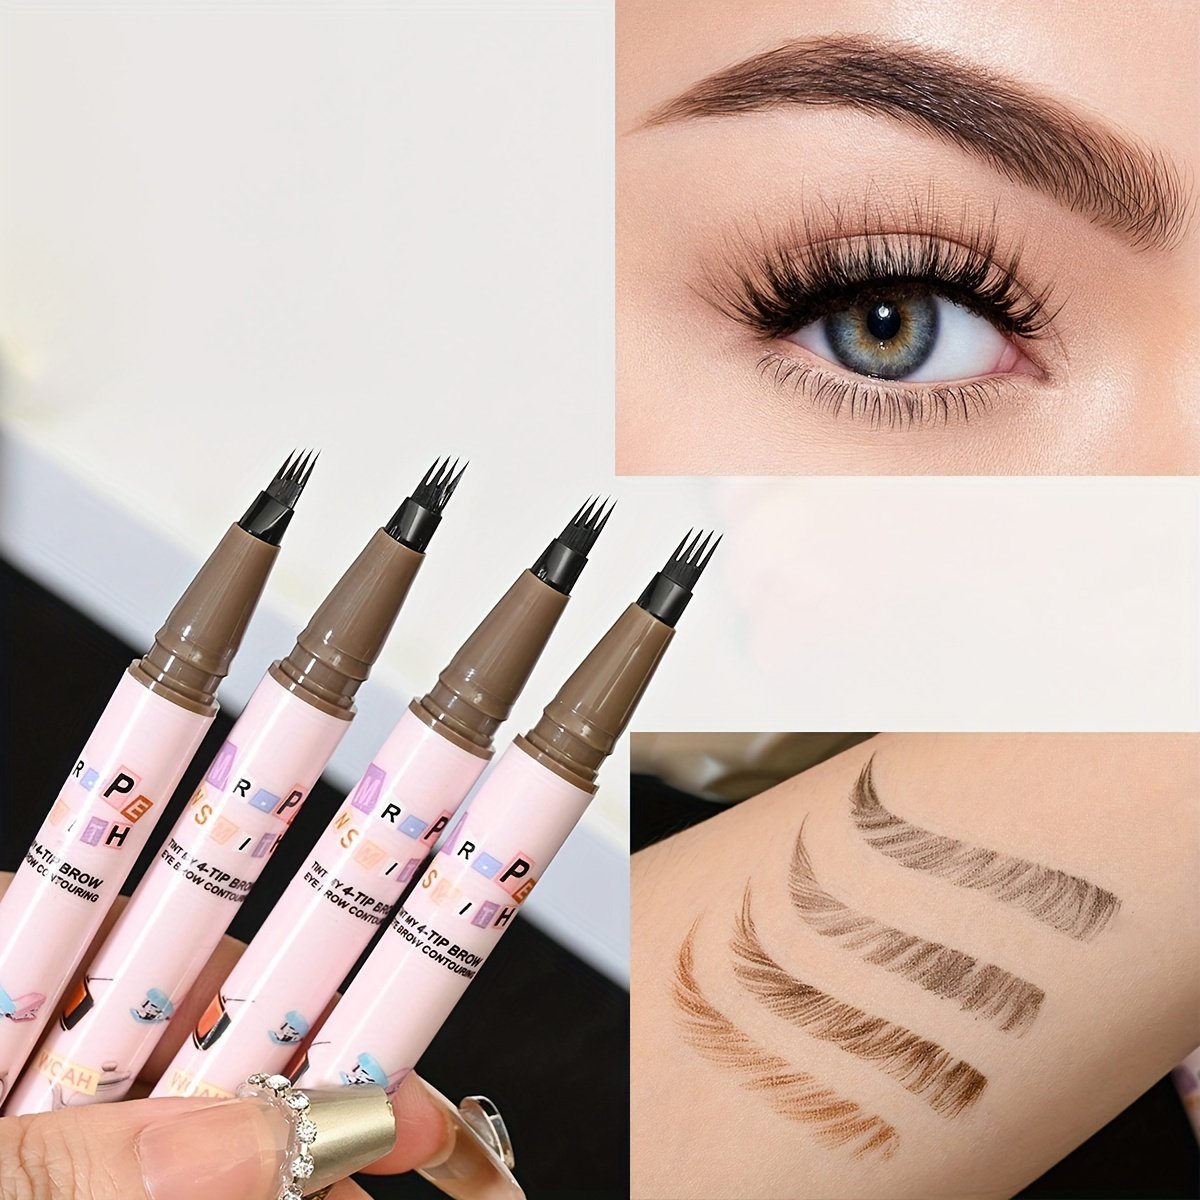 

4 Split Head Liquid Eyebrow Pencil, 0.6ml, Durable Waterproof, Fast Drying, Thick, Filling Sparse Eyebrows, High Color Rendering, Easy Applying For Beginners